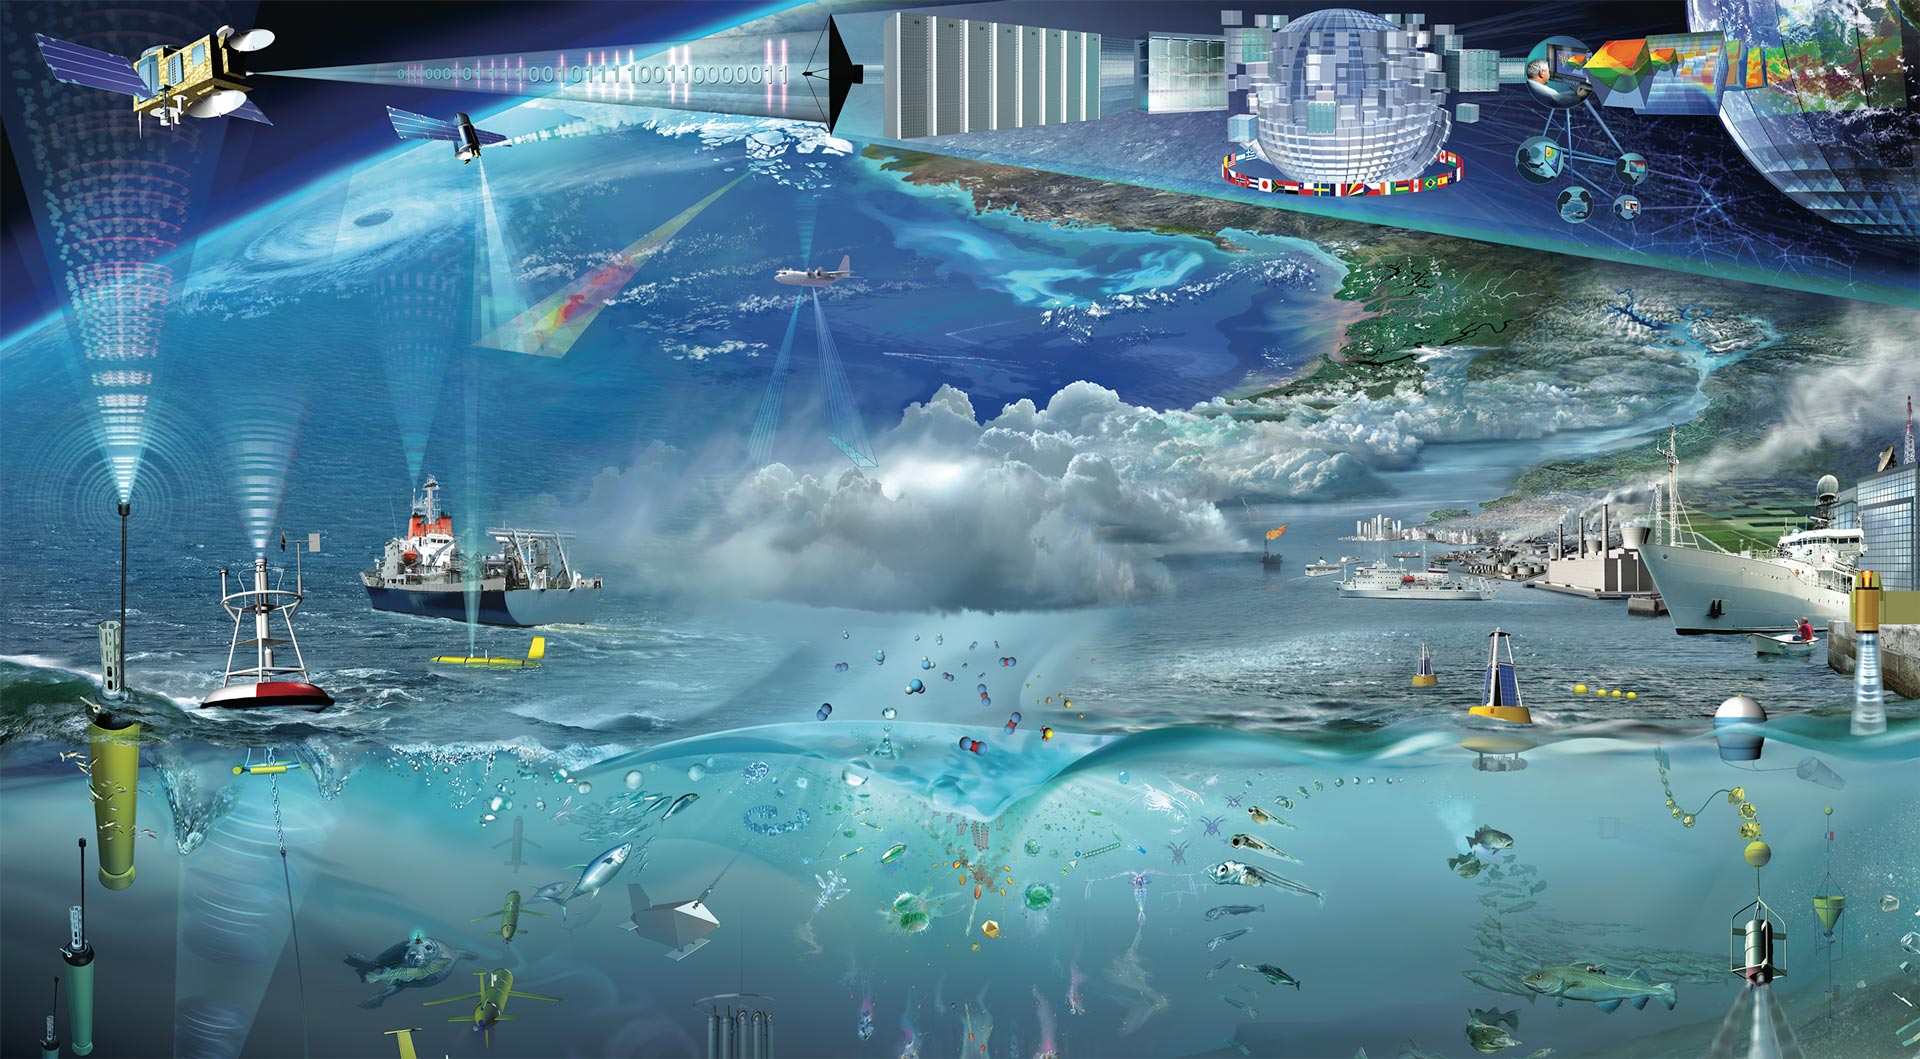 Ocean Observation Systems: Improving Our Understanding of the Ocean in New Ways